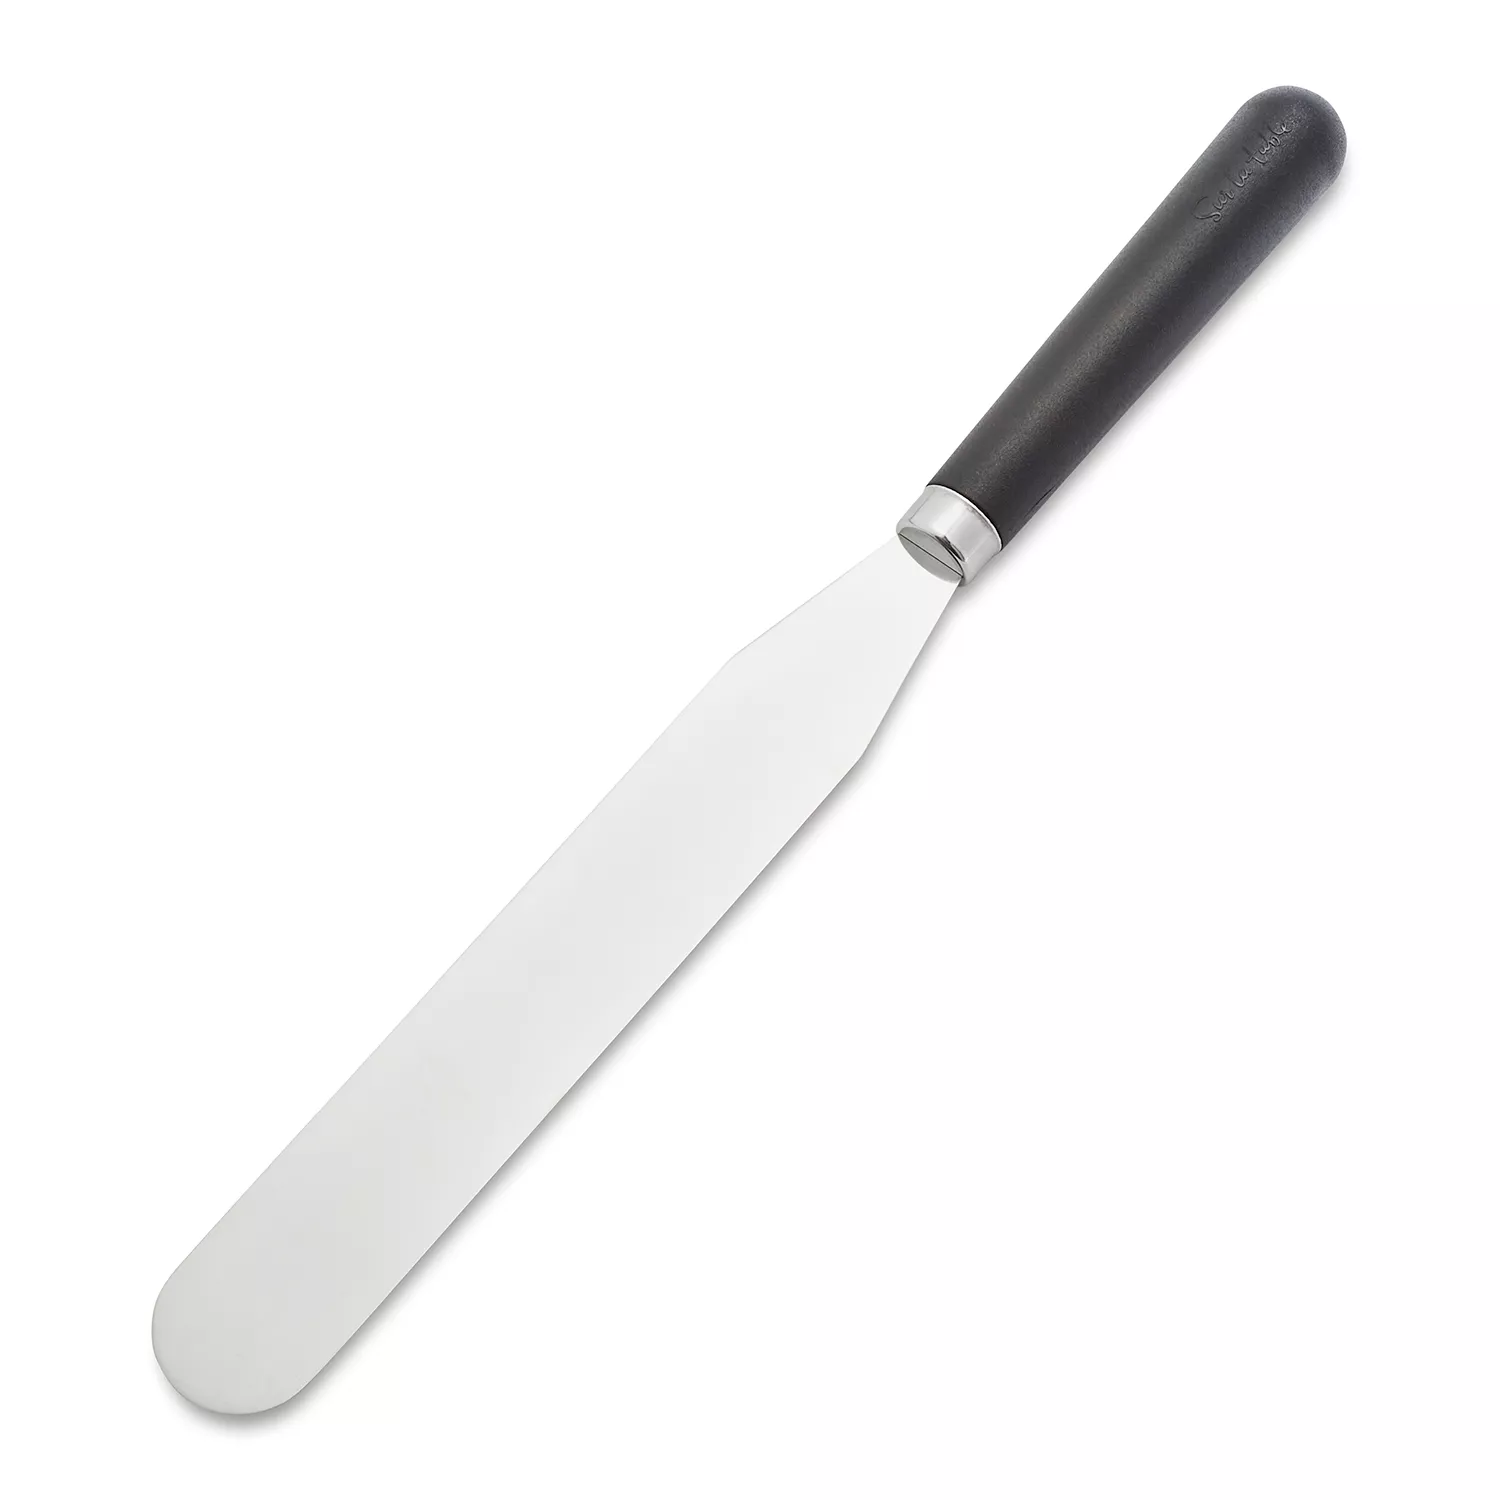  New Star Foodservice 38125 Straight Icing Spatula, 14